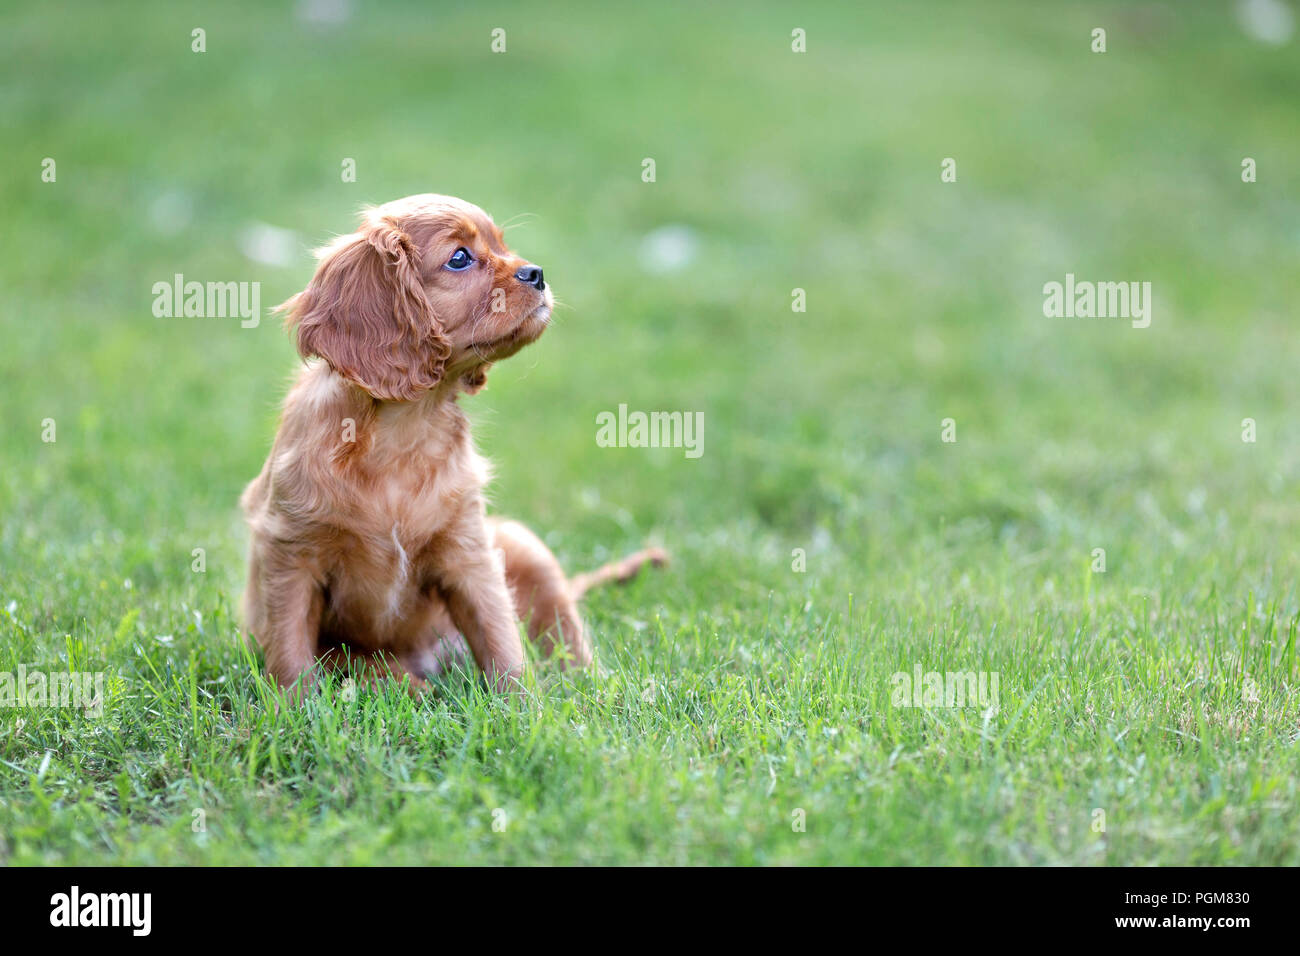 Adorable puppy sitting on the grass Stock Photo